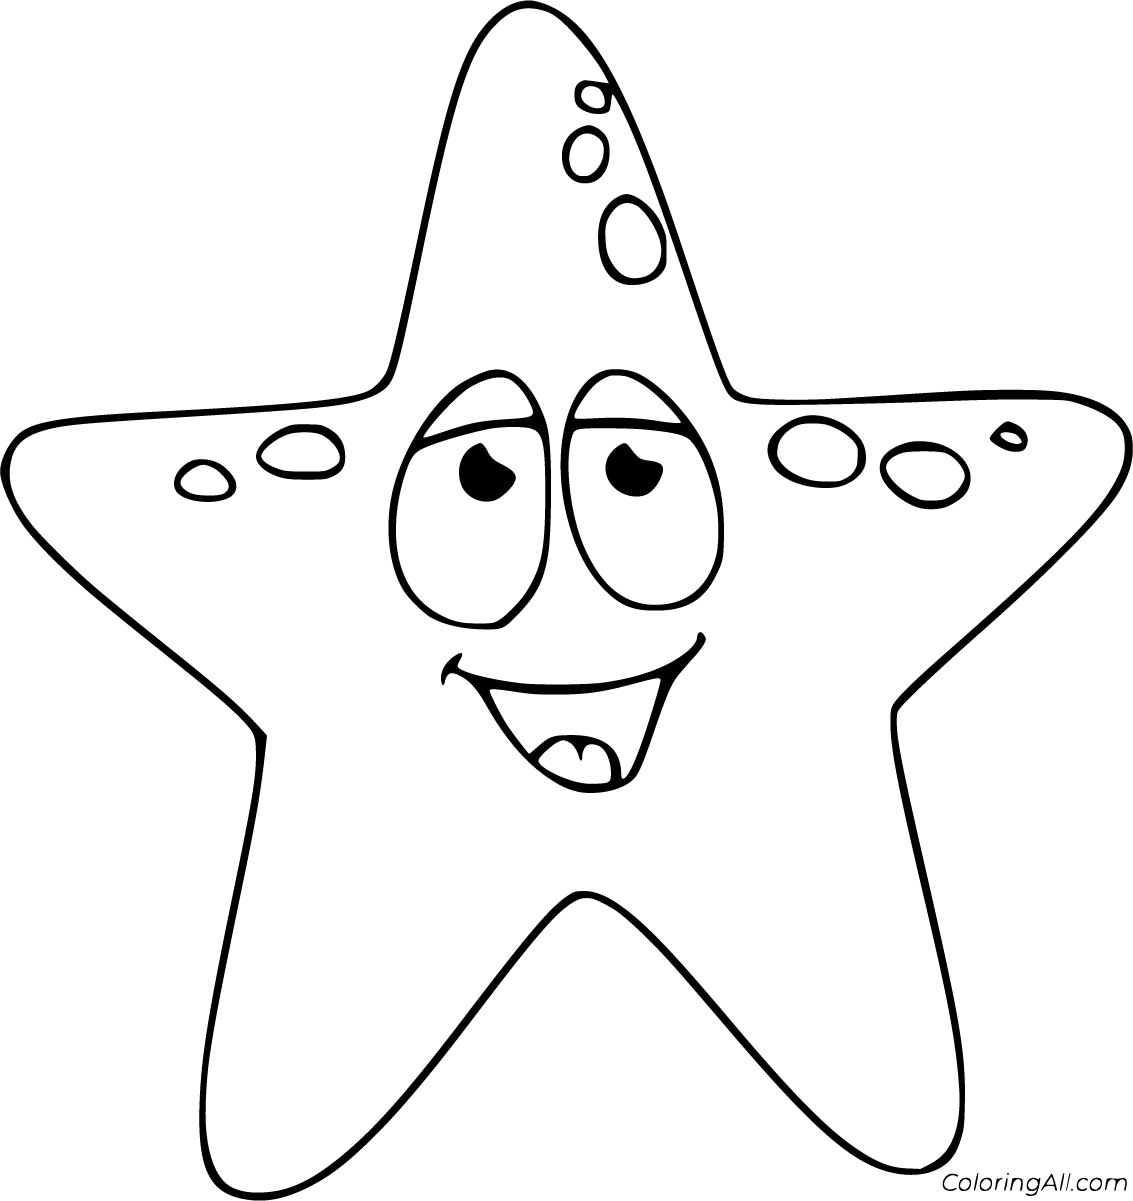 starfish-coloring-pages-coloringall